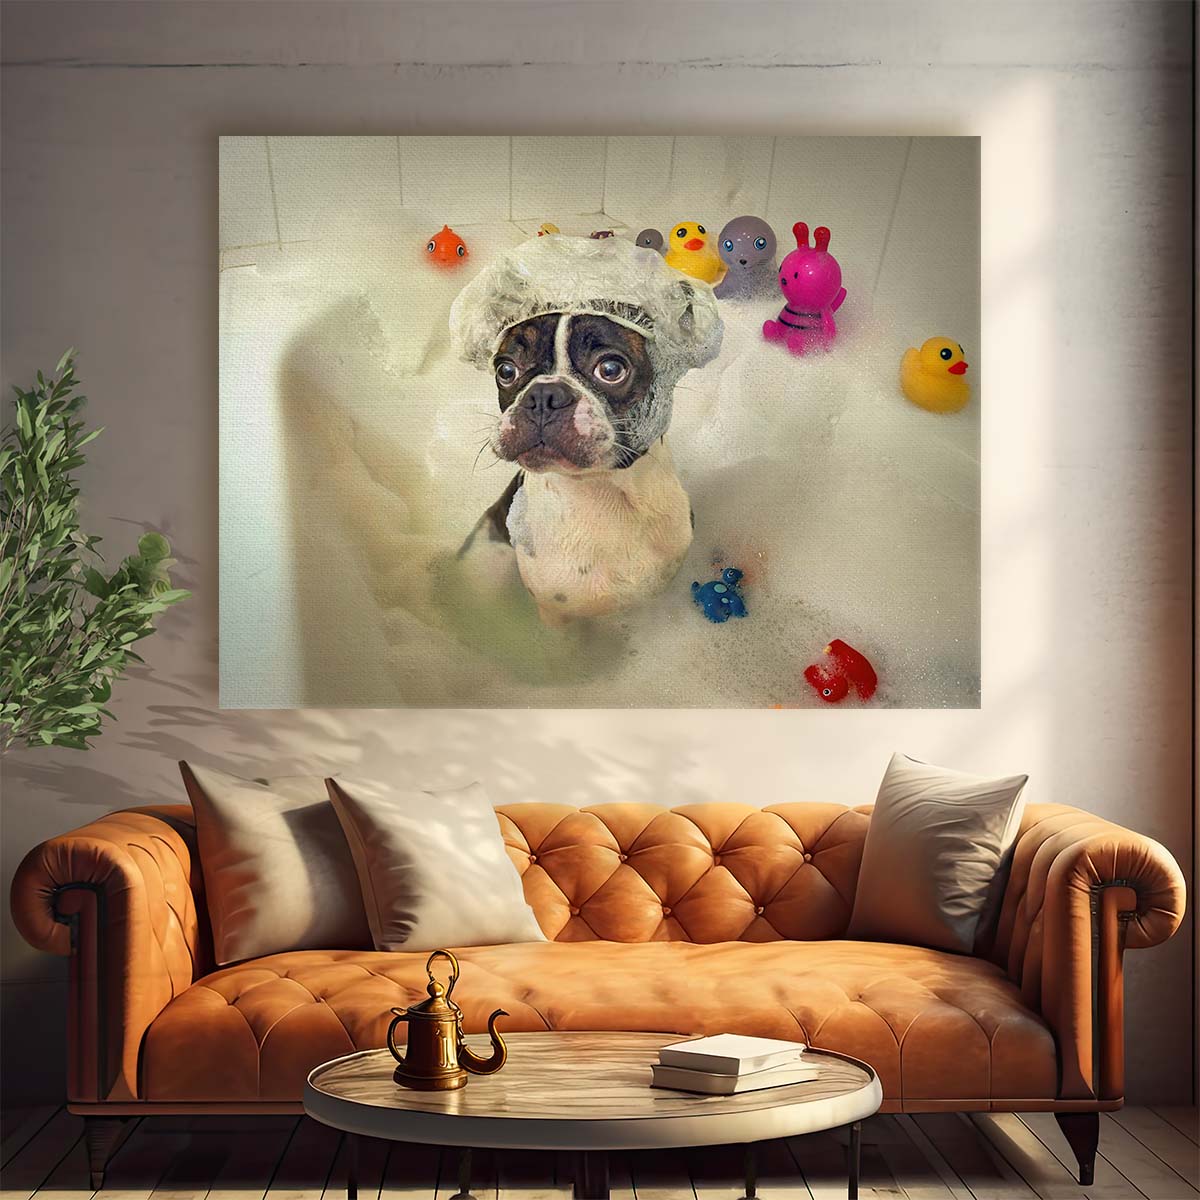 Adorable Dog Enjoying Bath Time with Rubber Ducks Wall Art by Luxuriance Designs. Made in USA.